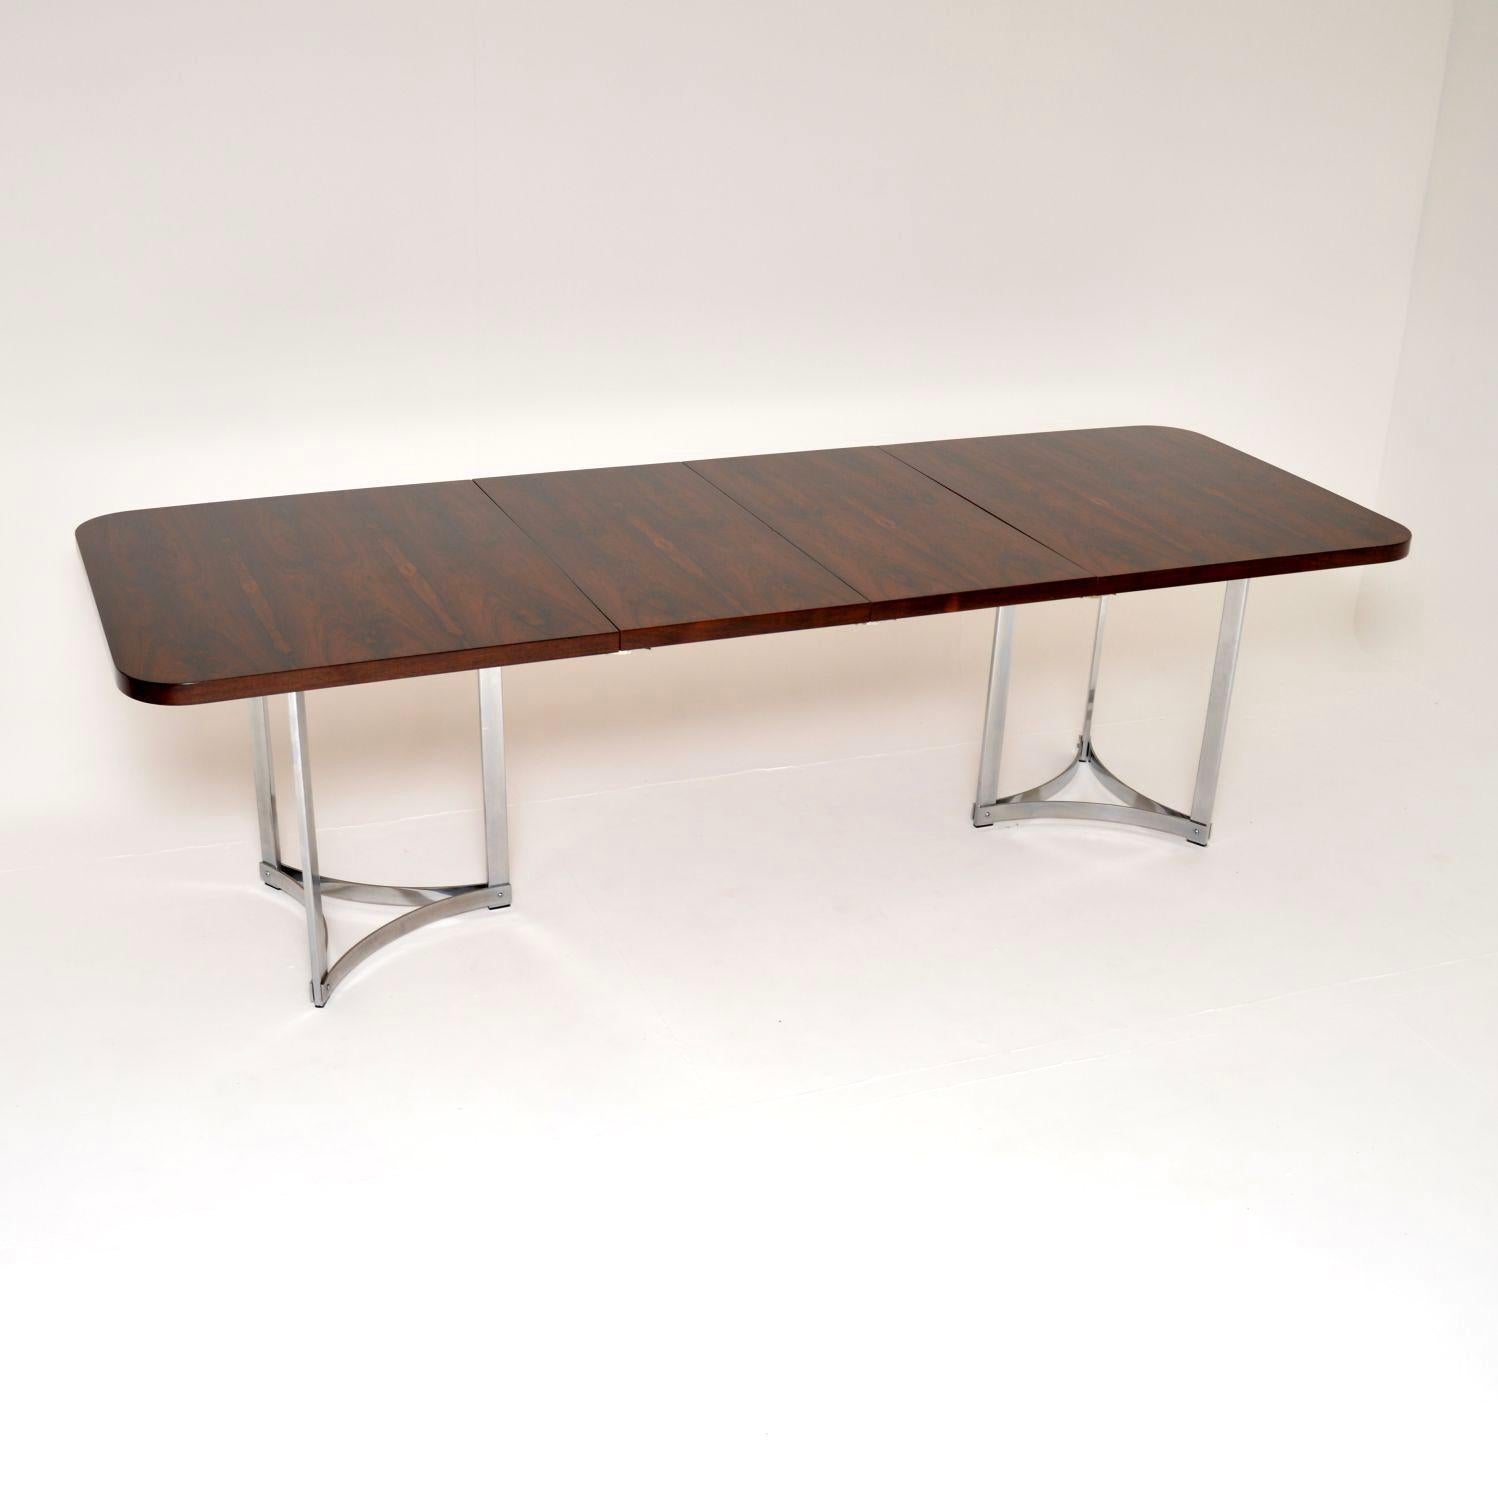 A stunning and extremely rare vintage dining table in wood and chrome, designed by Richard Young for Merrow Associates. This is the least commonly seen model, it has an absolutely beautiful design.

The rectangular top is long and relatively